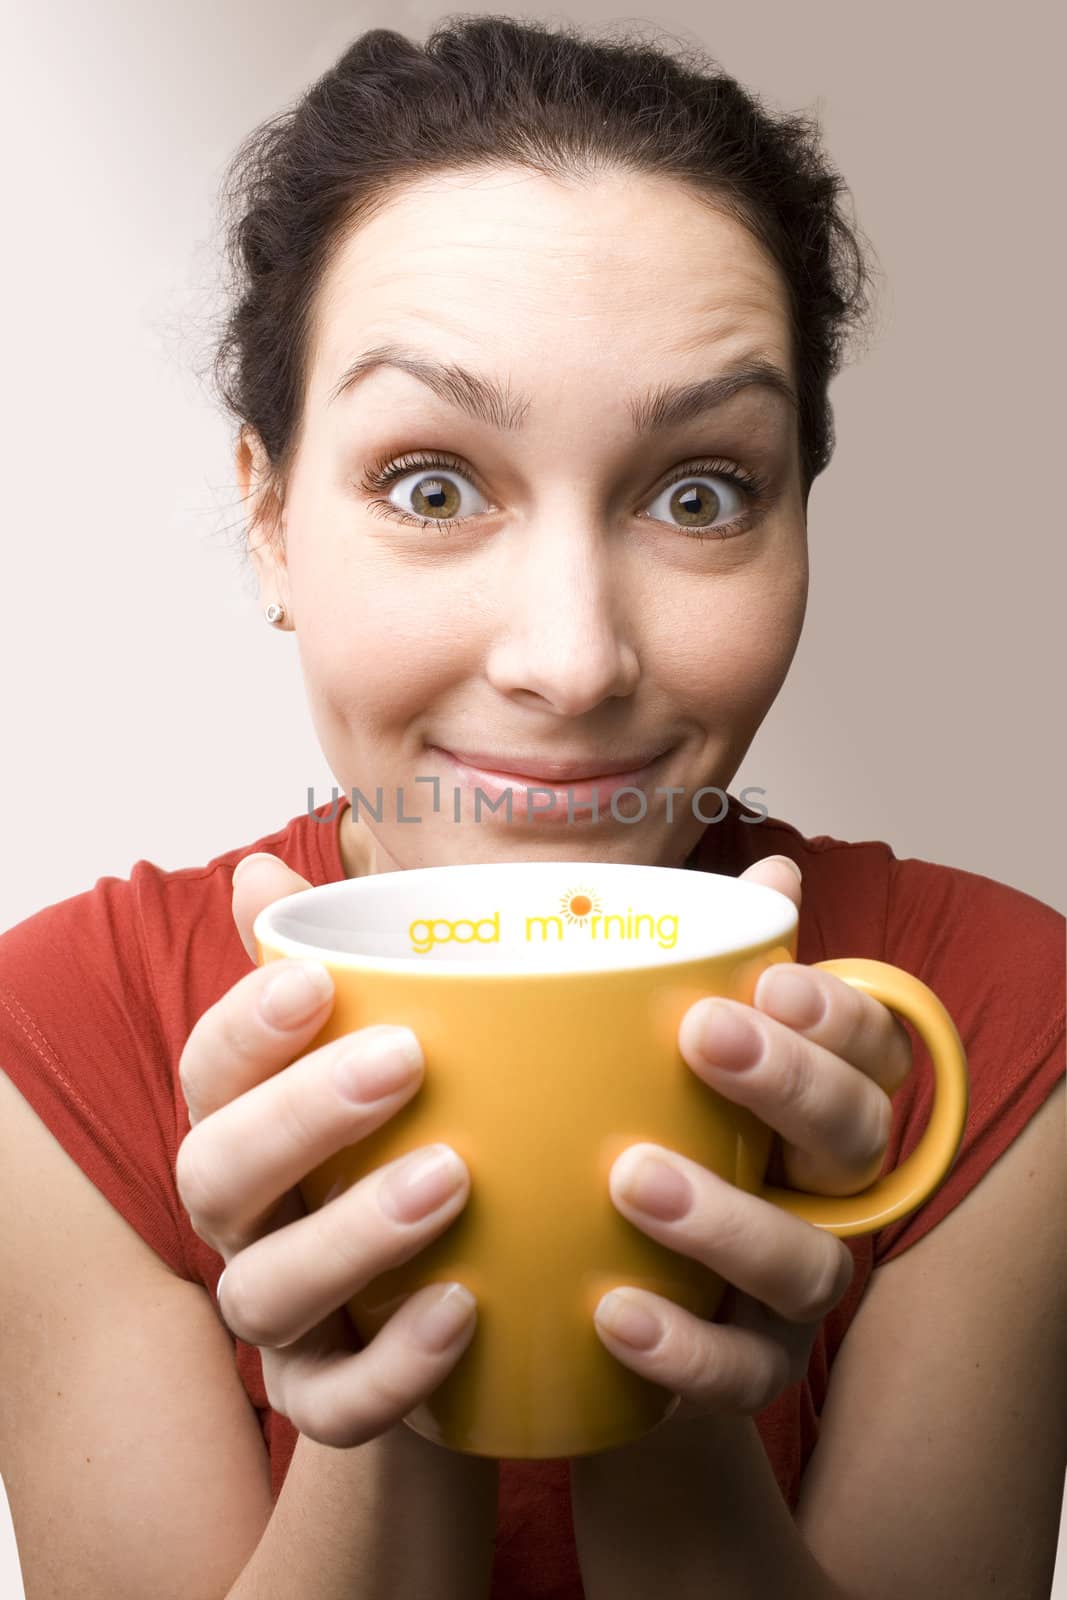 positive girl with yellow cup titled "Good morning"